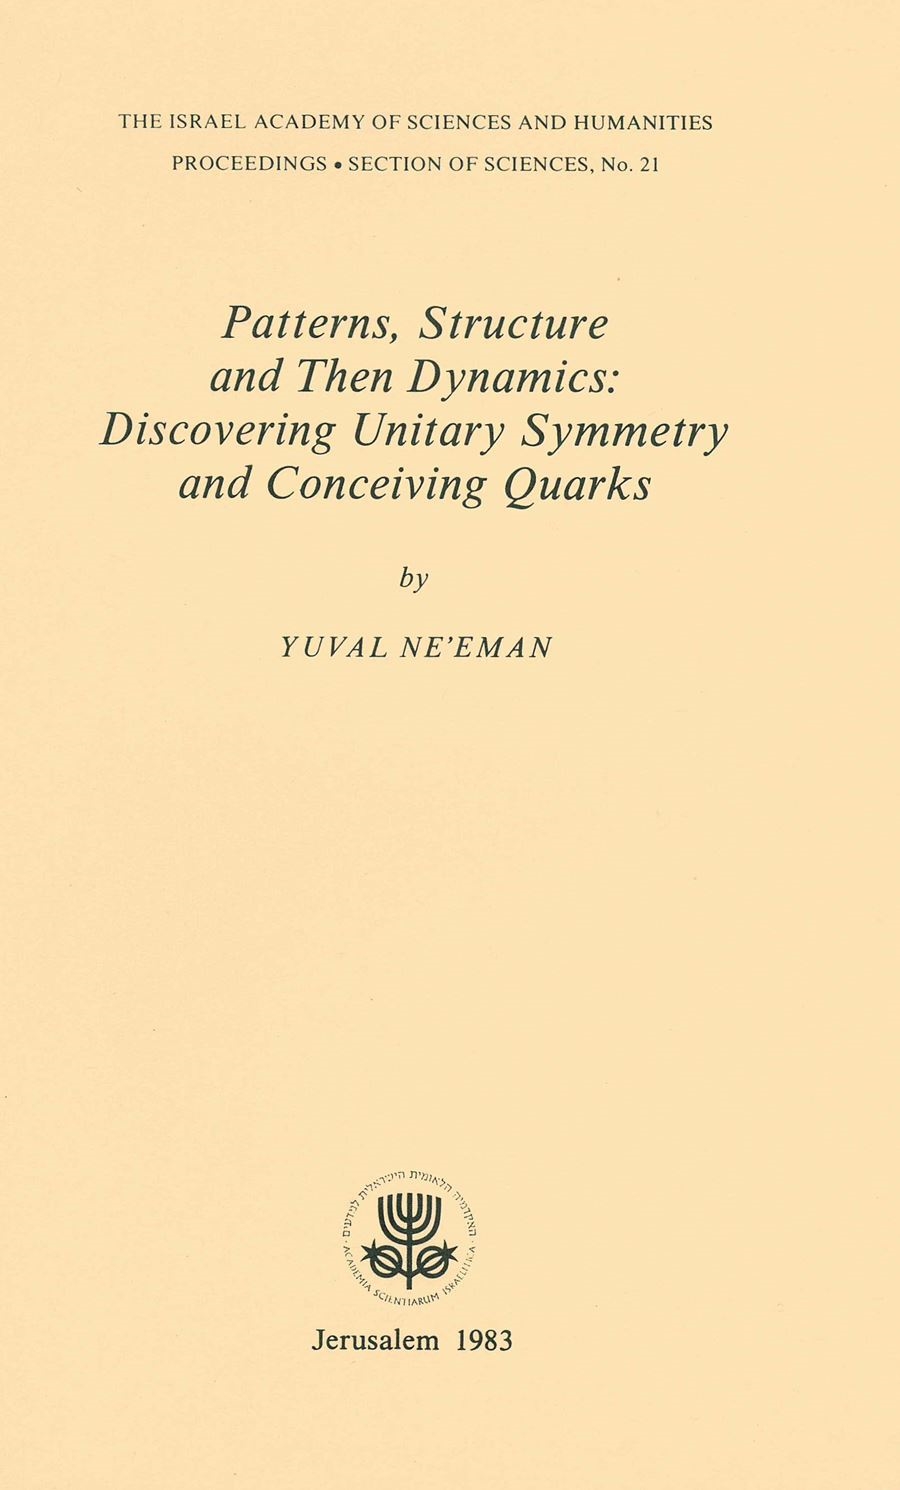 Patterns, Structure and then Dynamics: Discovering Unitary Symmetry and Conceiving Quarks